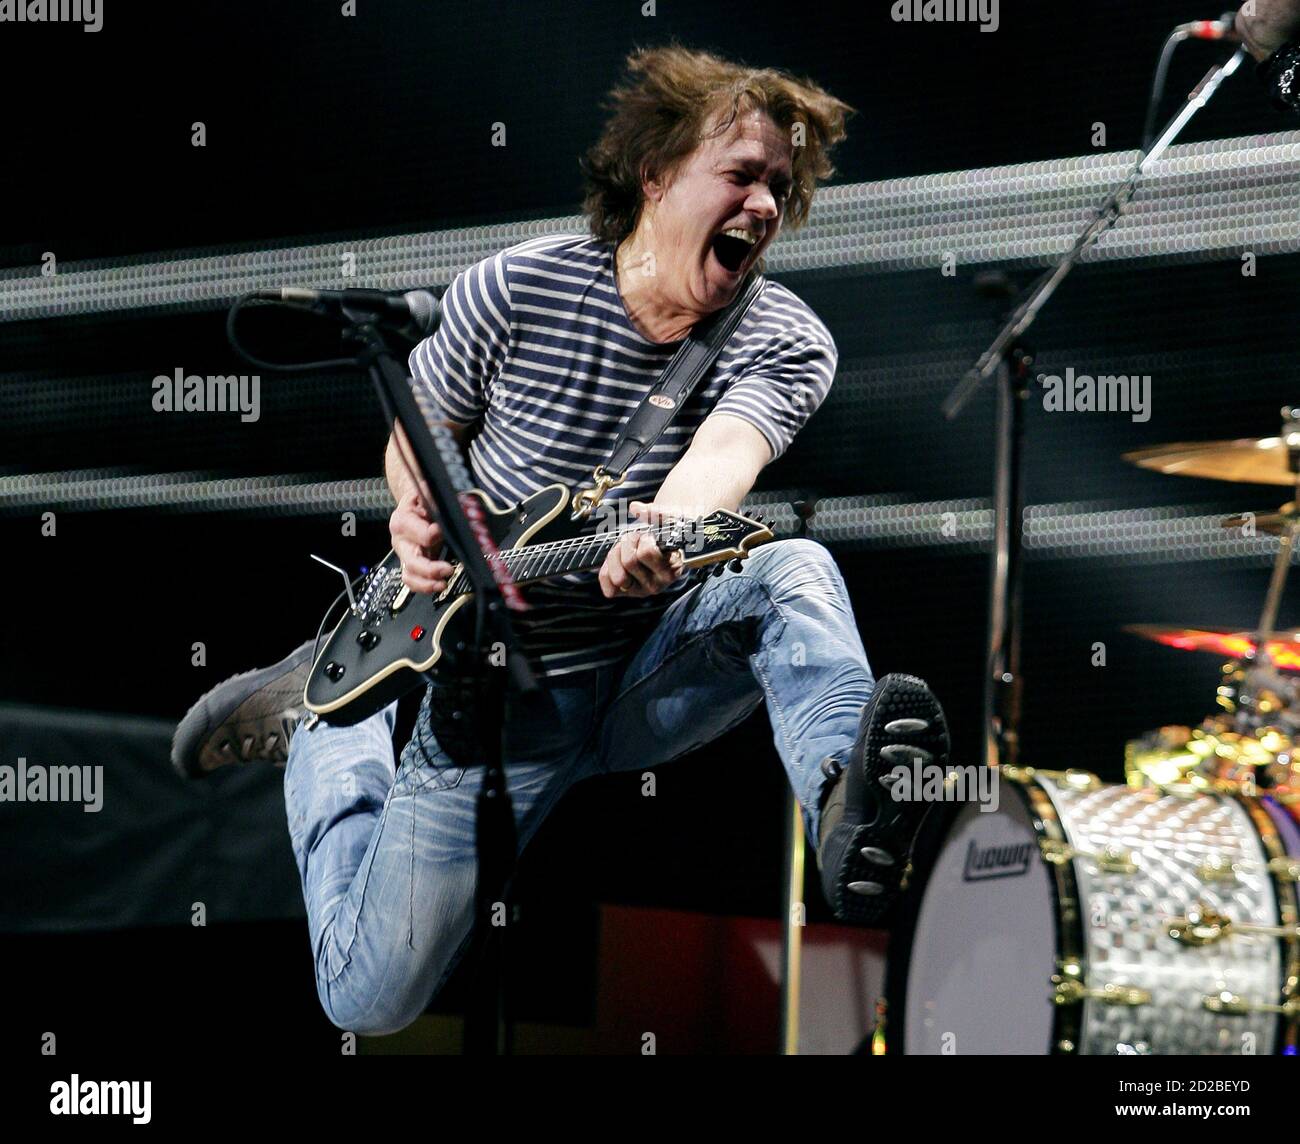 New York, United States. 06th Oct, 2020. Eddie Van Halen and Van Halen perform at Madison Square Garden in New York City on March 1, 2012. The legendary hall of fame rock guitarist died on Tuesday at age 65 from throat cancer. Photo by John Angelillo/UPI Credit: UPI/Alamy Live News Stock Photo